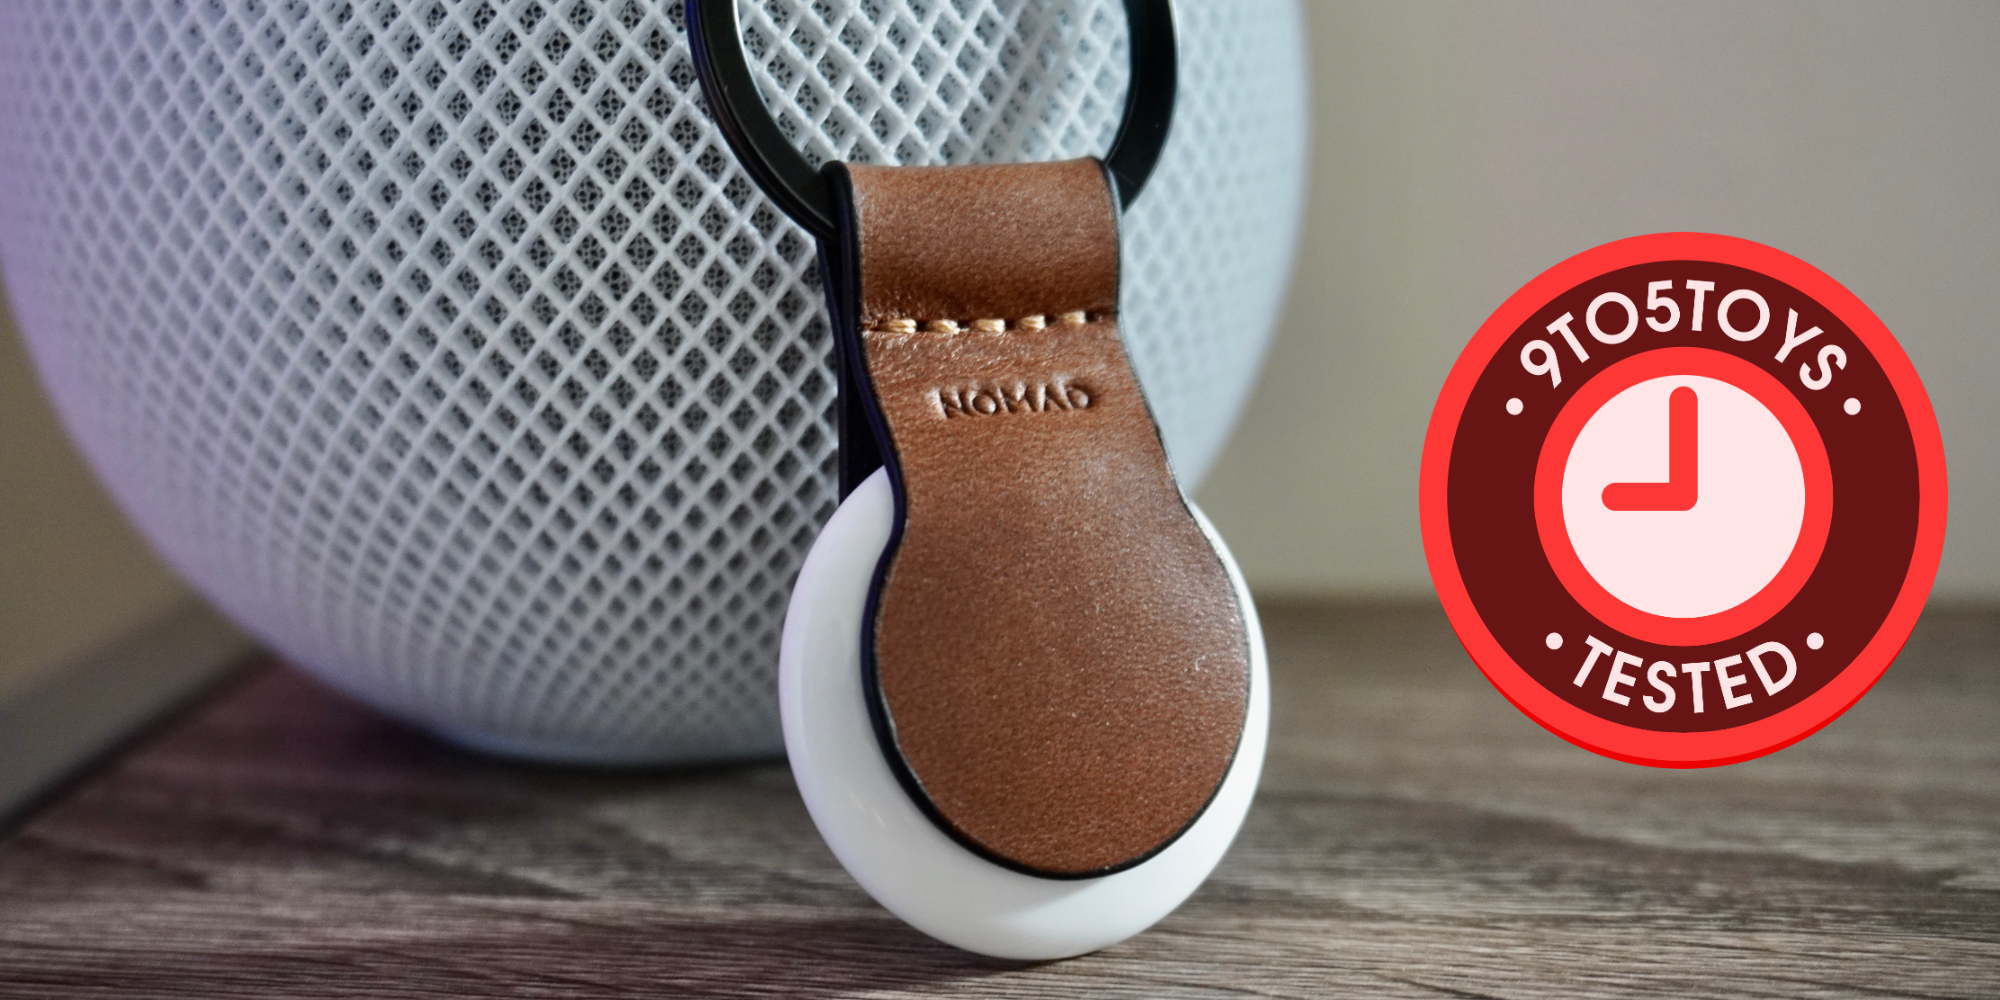 Nomad Leather Loop Review: Holds your AirTag close with minimal